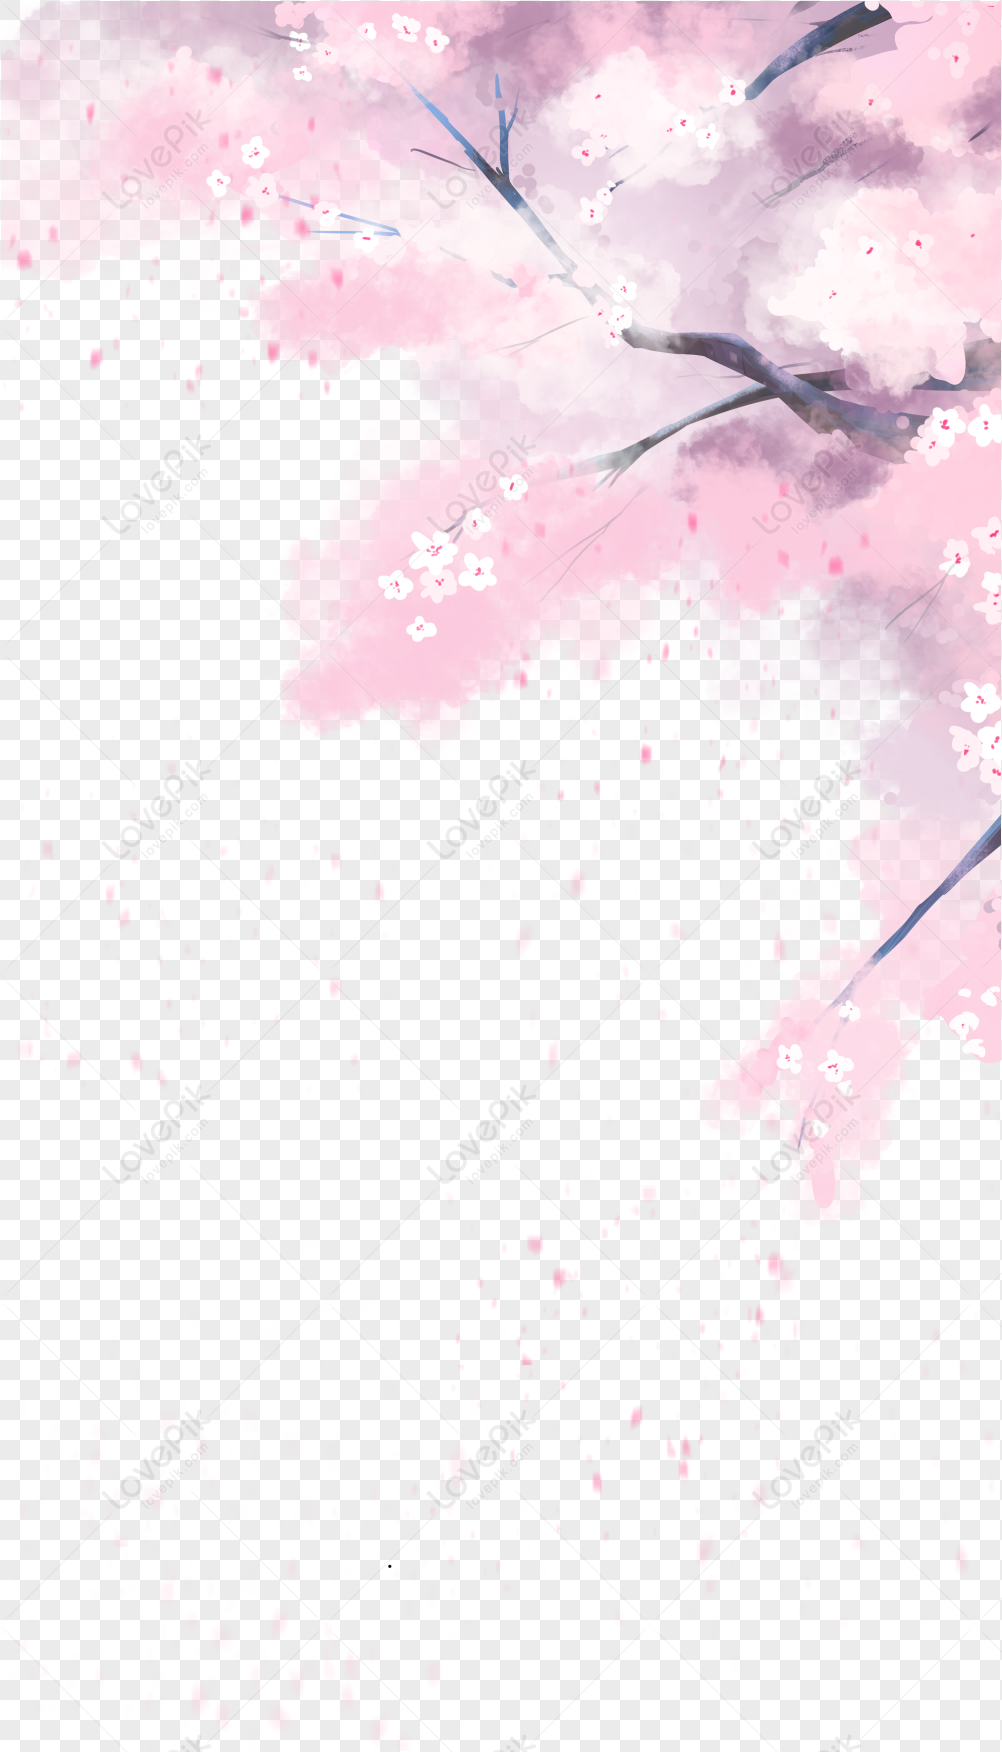 Cherry Blossom Tree with Falling Petals on Transparent Background